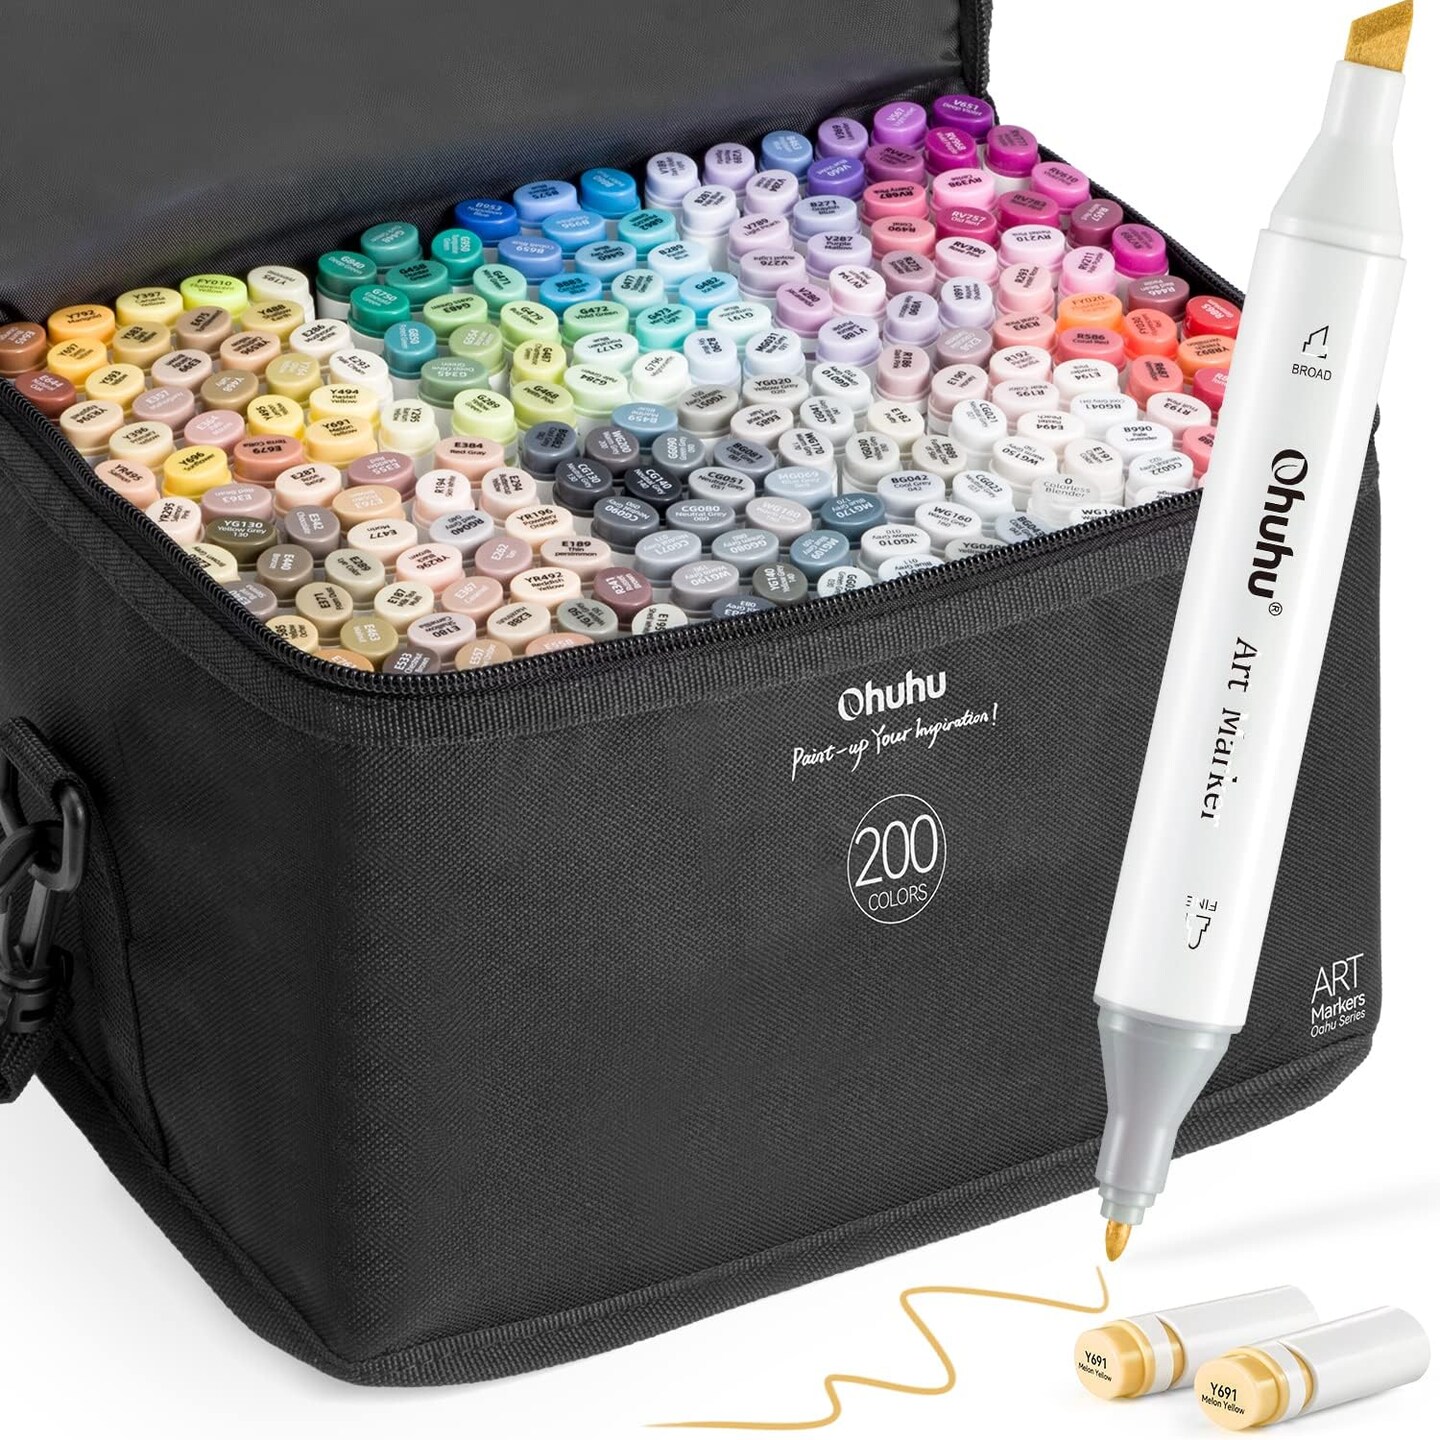 Ohuhu Alcohol Markers 200 Colors - Double Tipped Art Drawing Marker Set for  Artists Adults Coloring Sketch Illustration - Chisel & Fine Dual Tip - Oahu  of Ohuhu Markers - Alcohol-based Refillable Ink